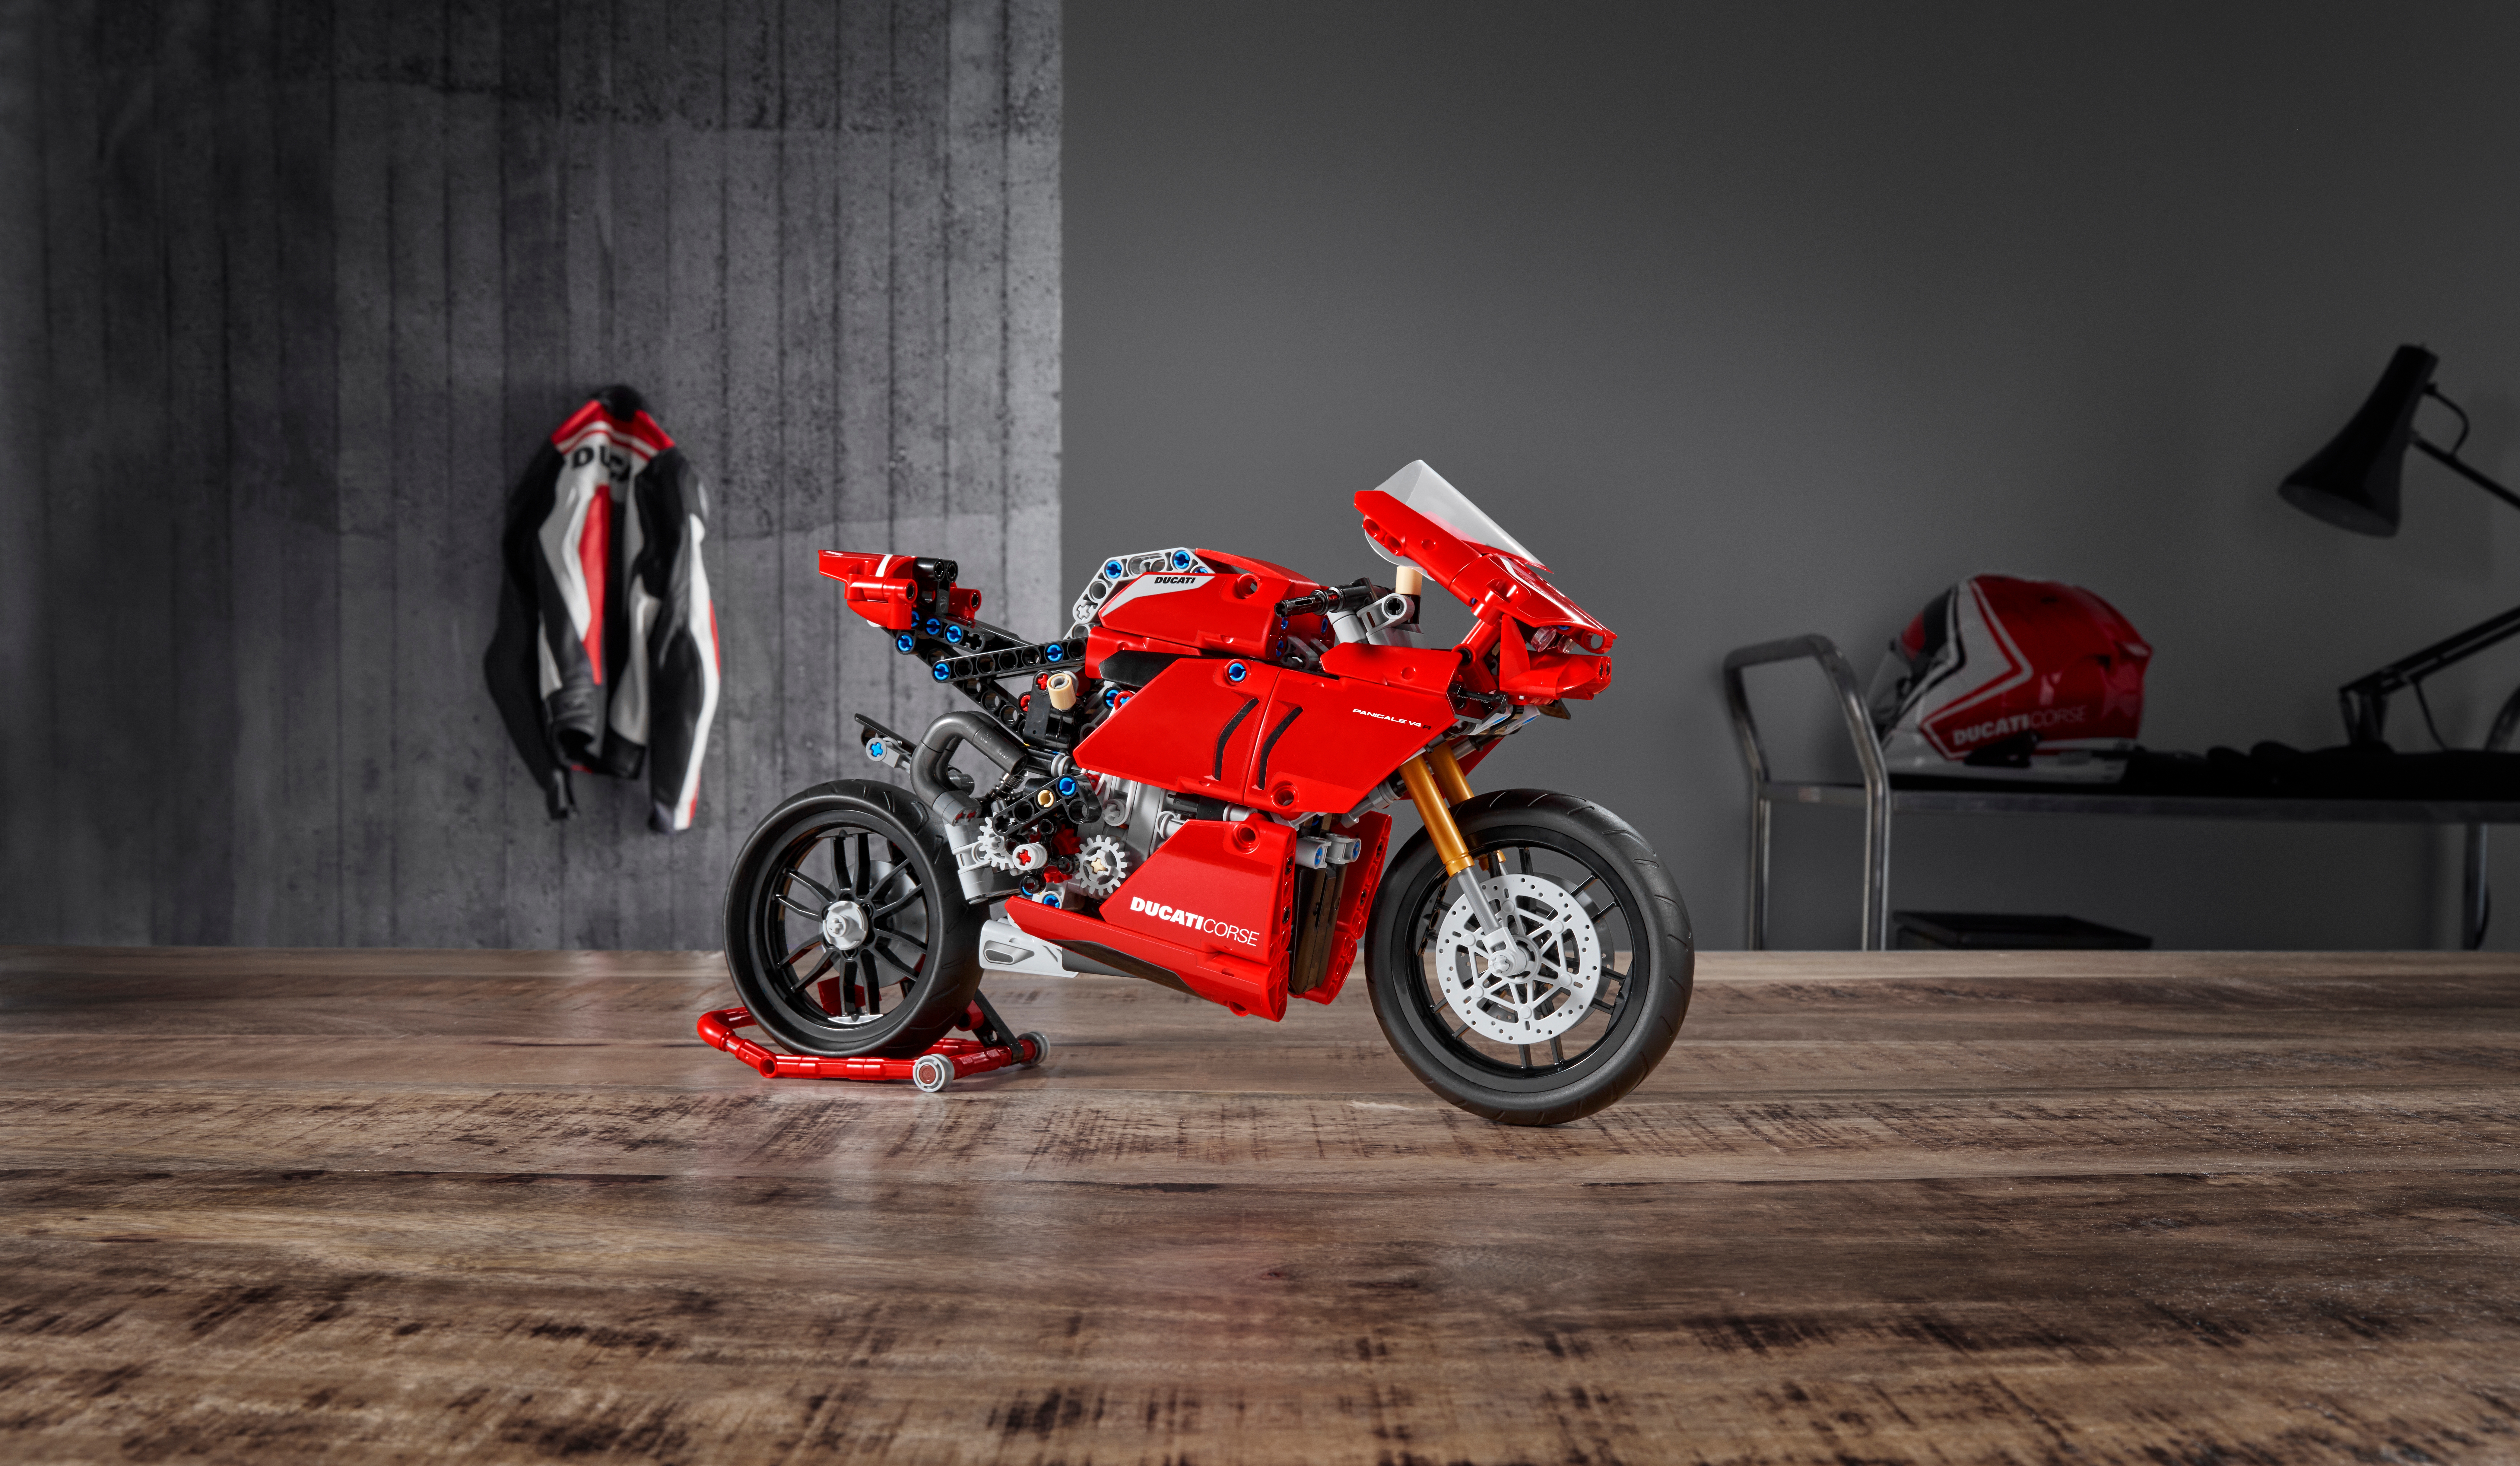 The Panigale V4 R Is the Most Powerful Production Bike From Ducati